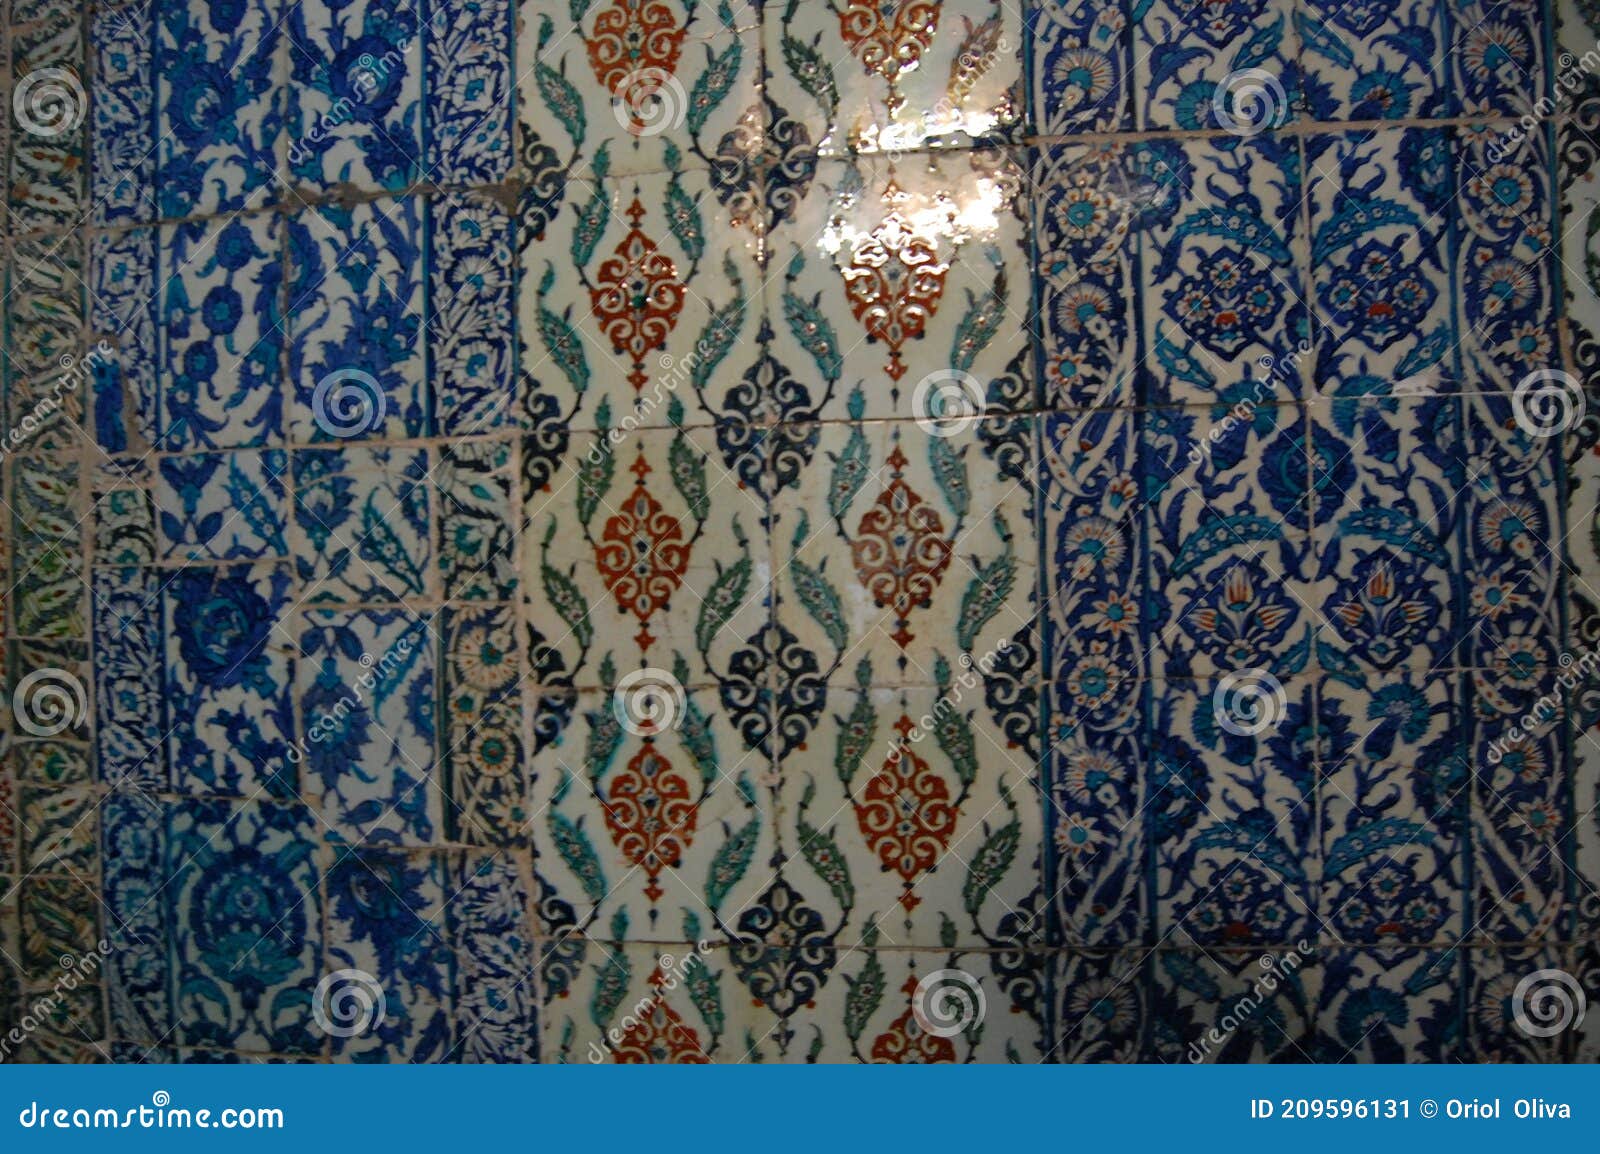 view of the topkapi palace, in istanbul turkey. tile